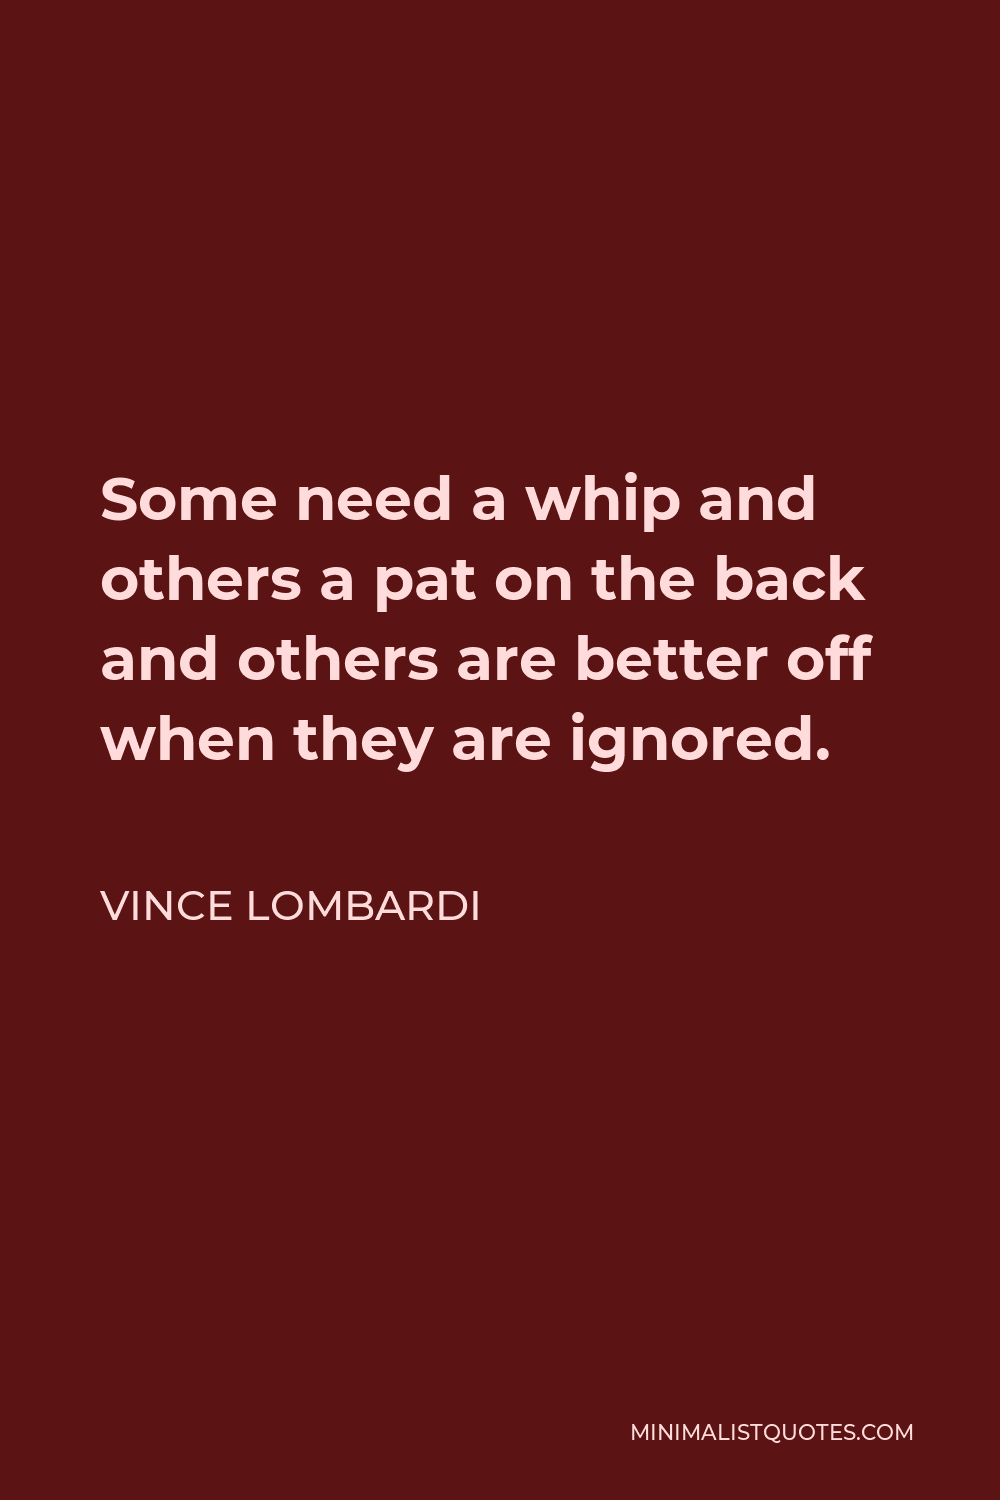 Vince Lombardi Quote - Some need a whip and others a pat on the back and others are better off when they are ignored.